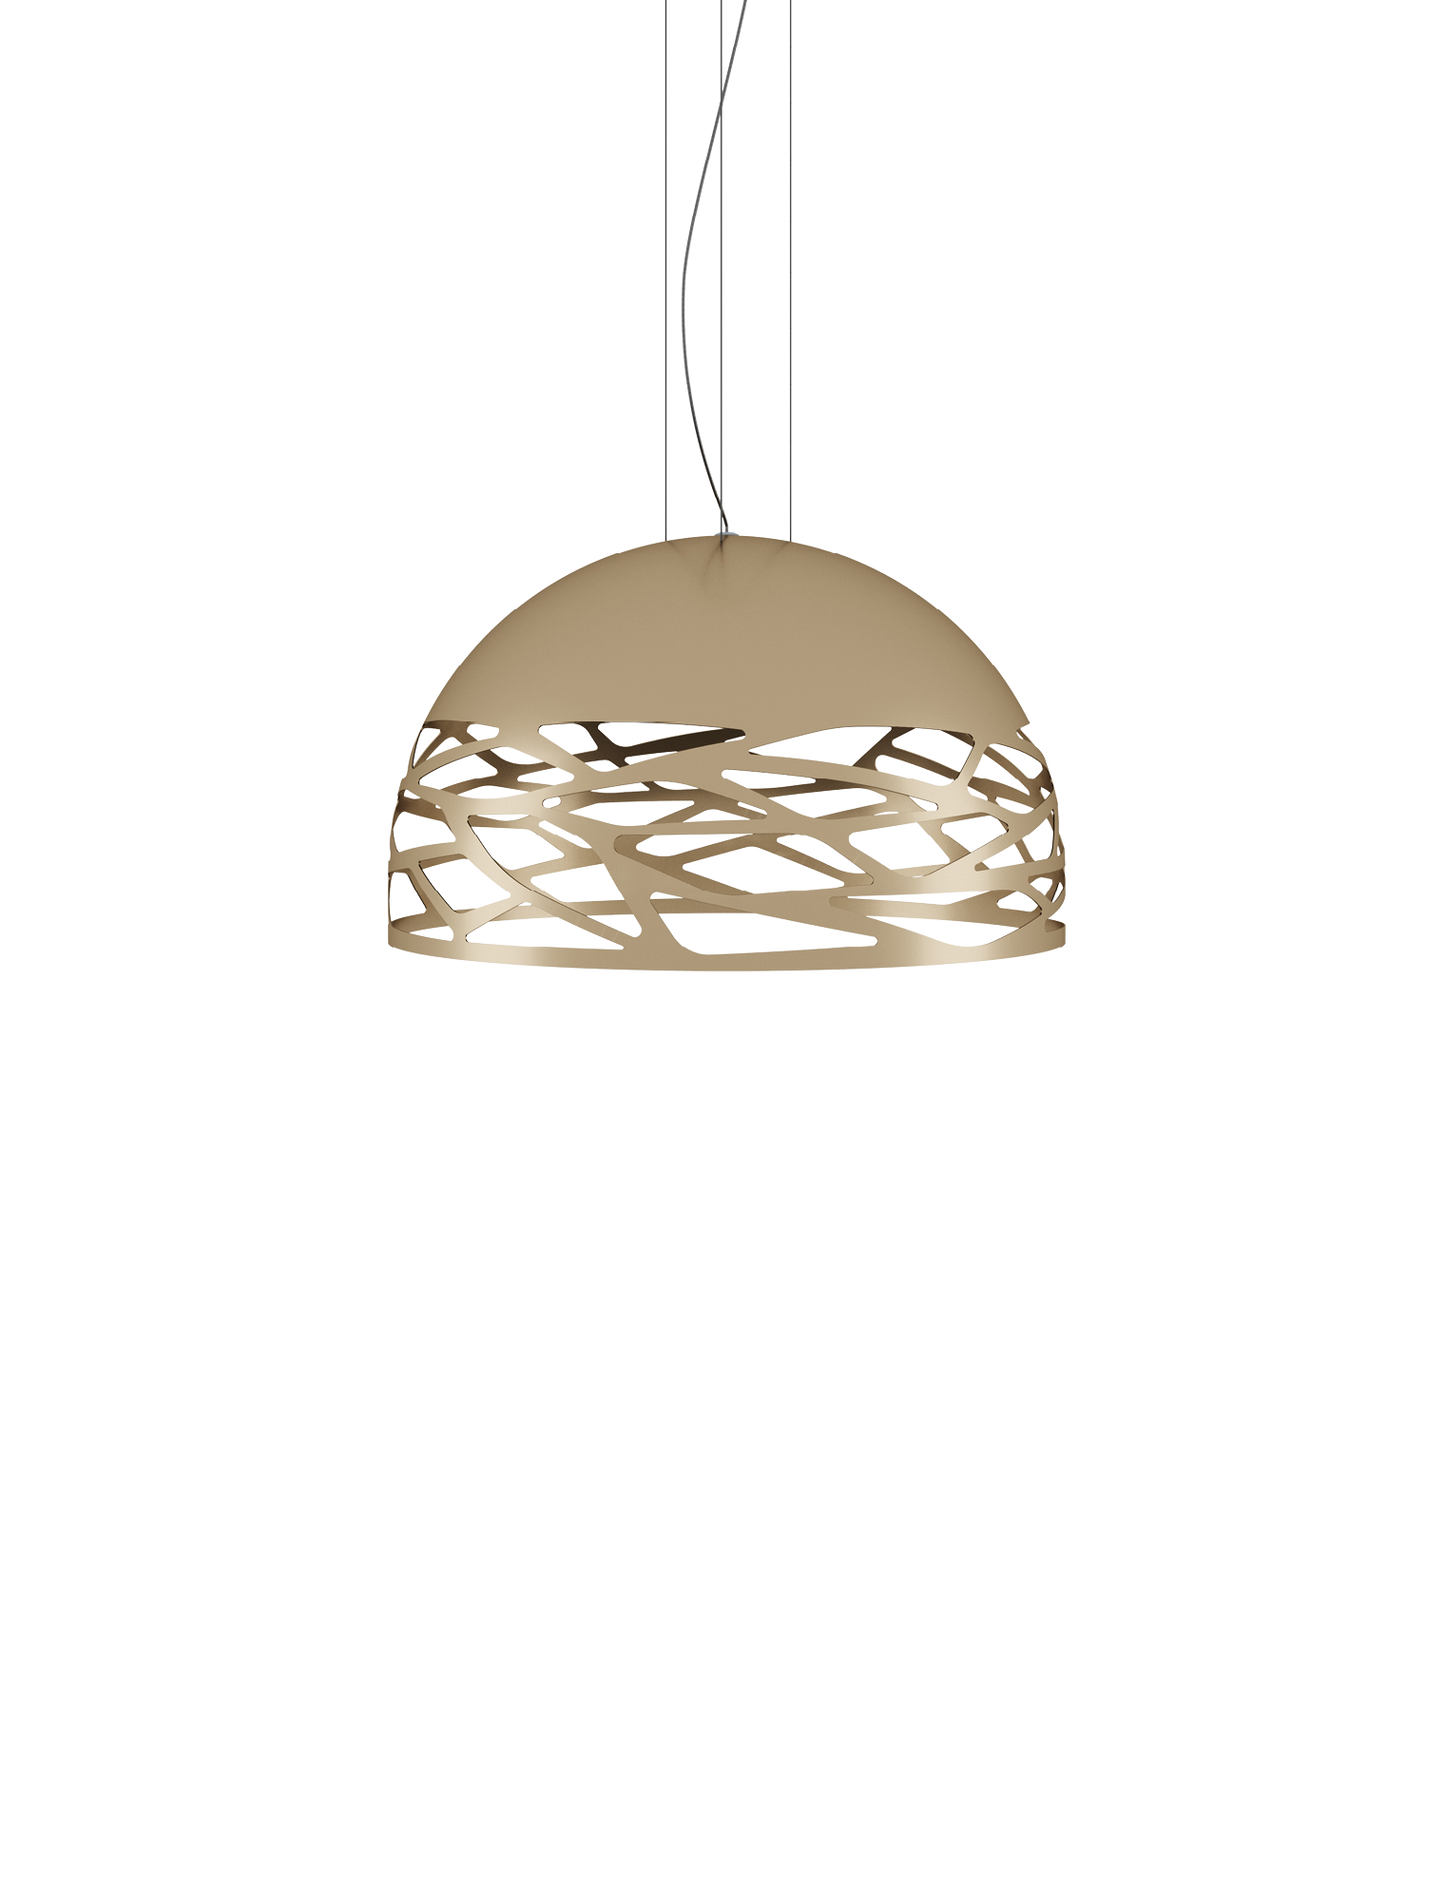 Lodes Kelly Dome 60 Pendant Lamp